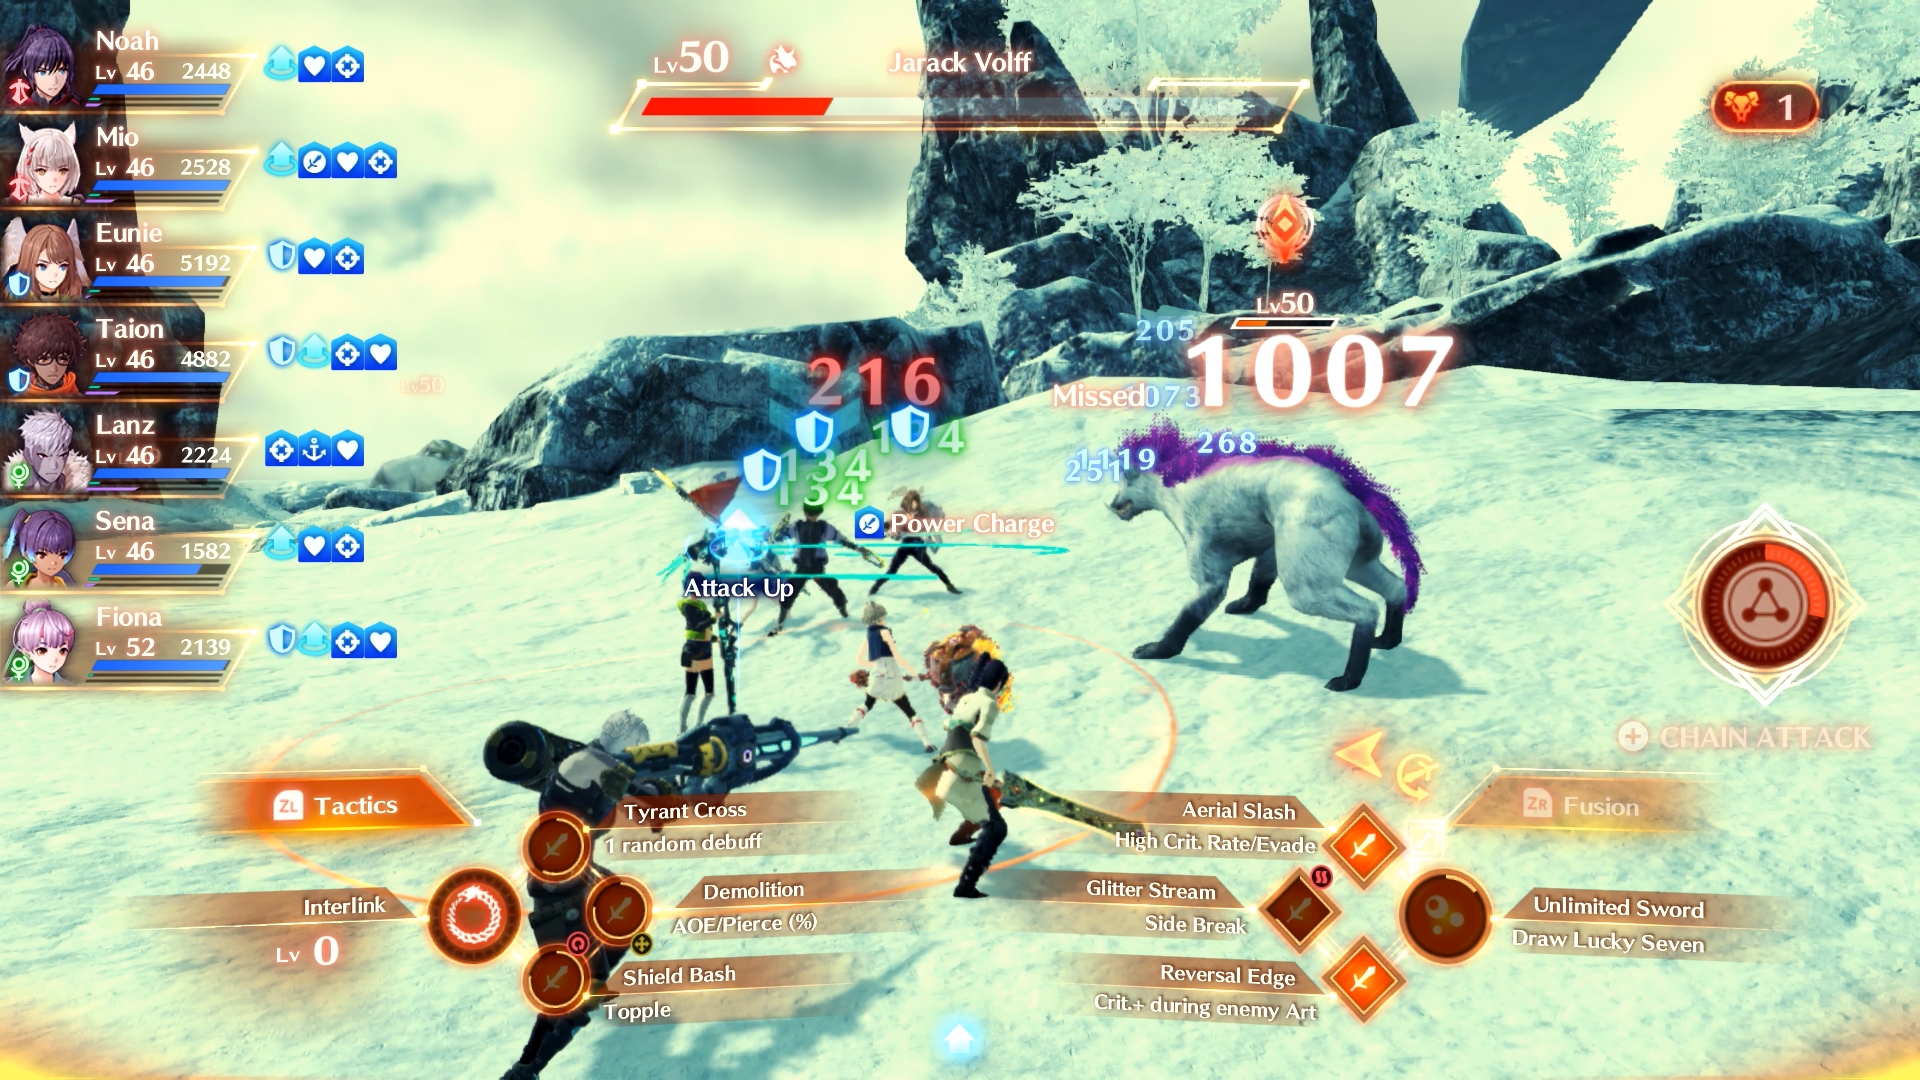 Xenoblade Chronicles 3 Review - An Unshakeable RPG Experience - Gamepur